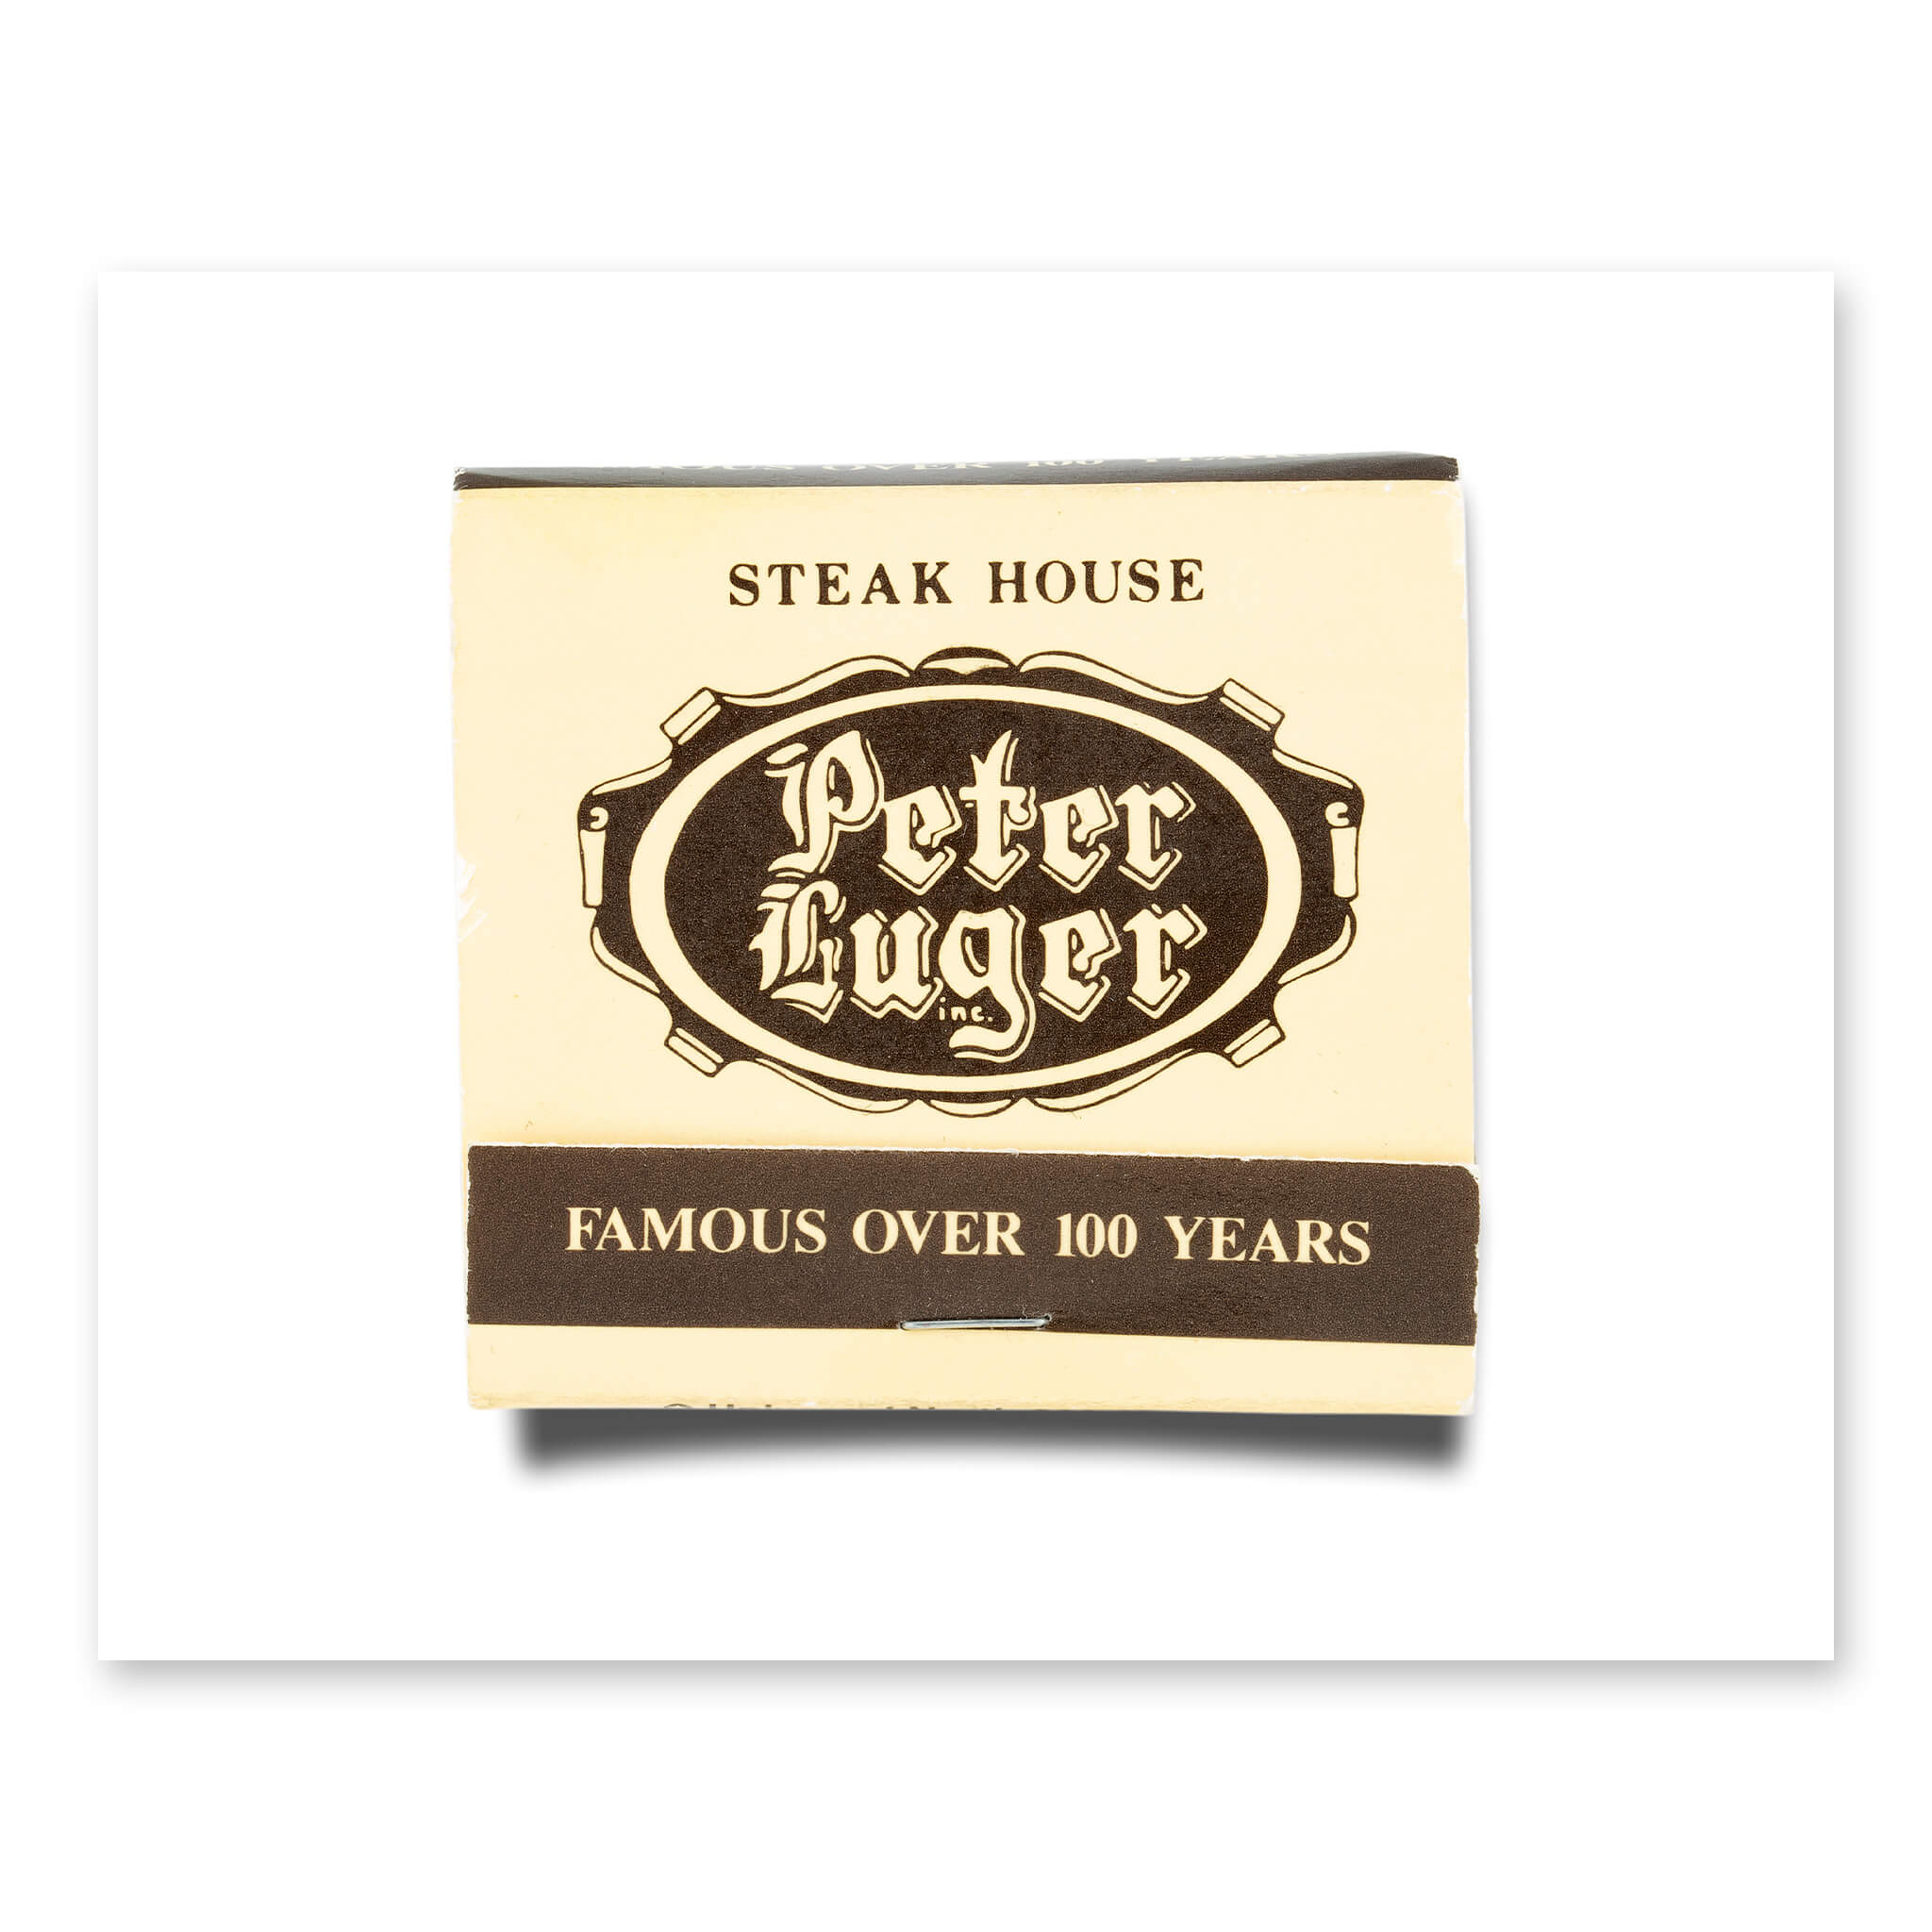 Peter Luger Steakhouse